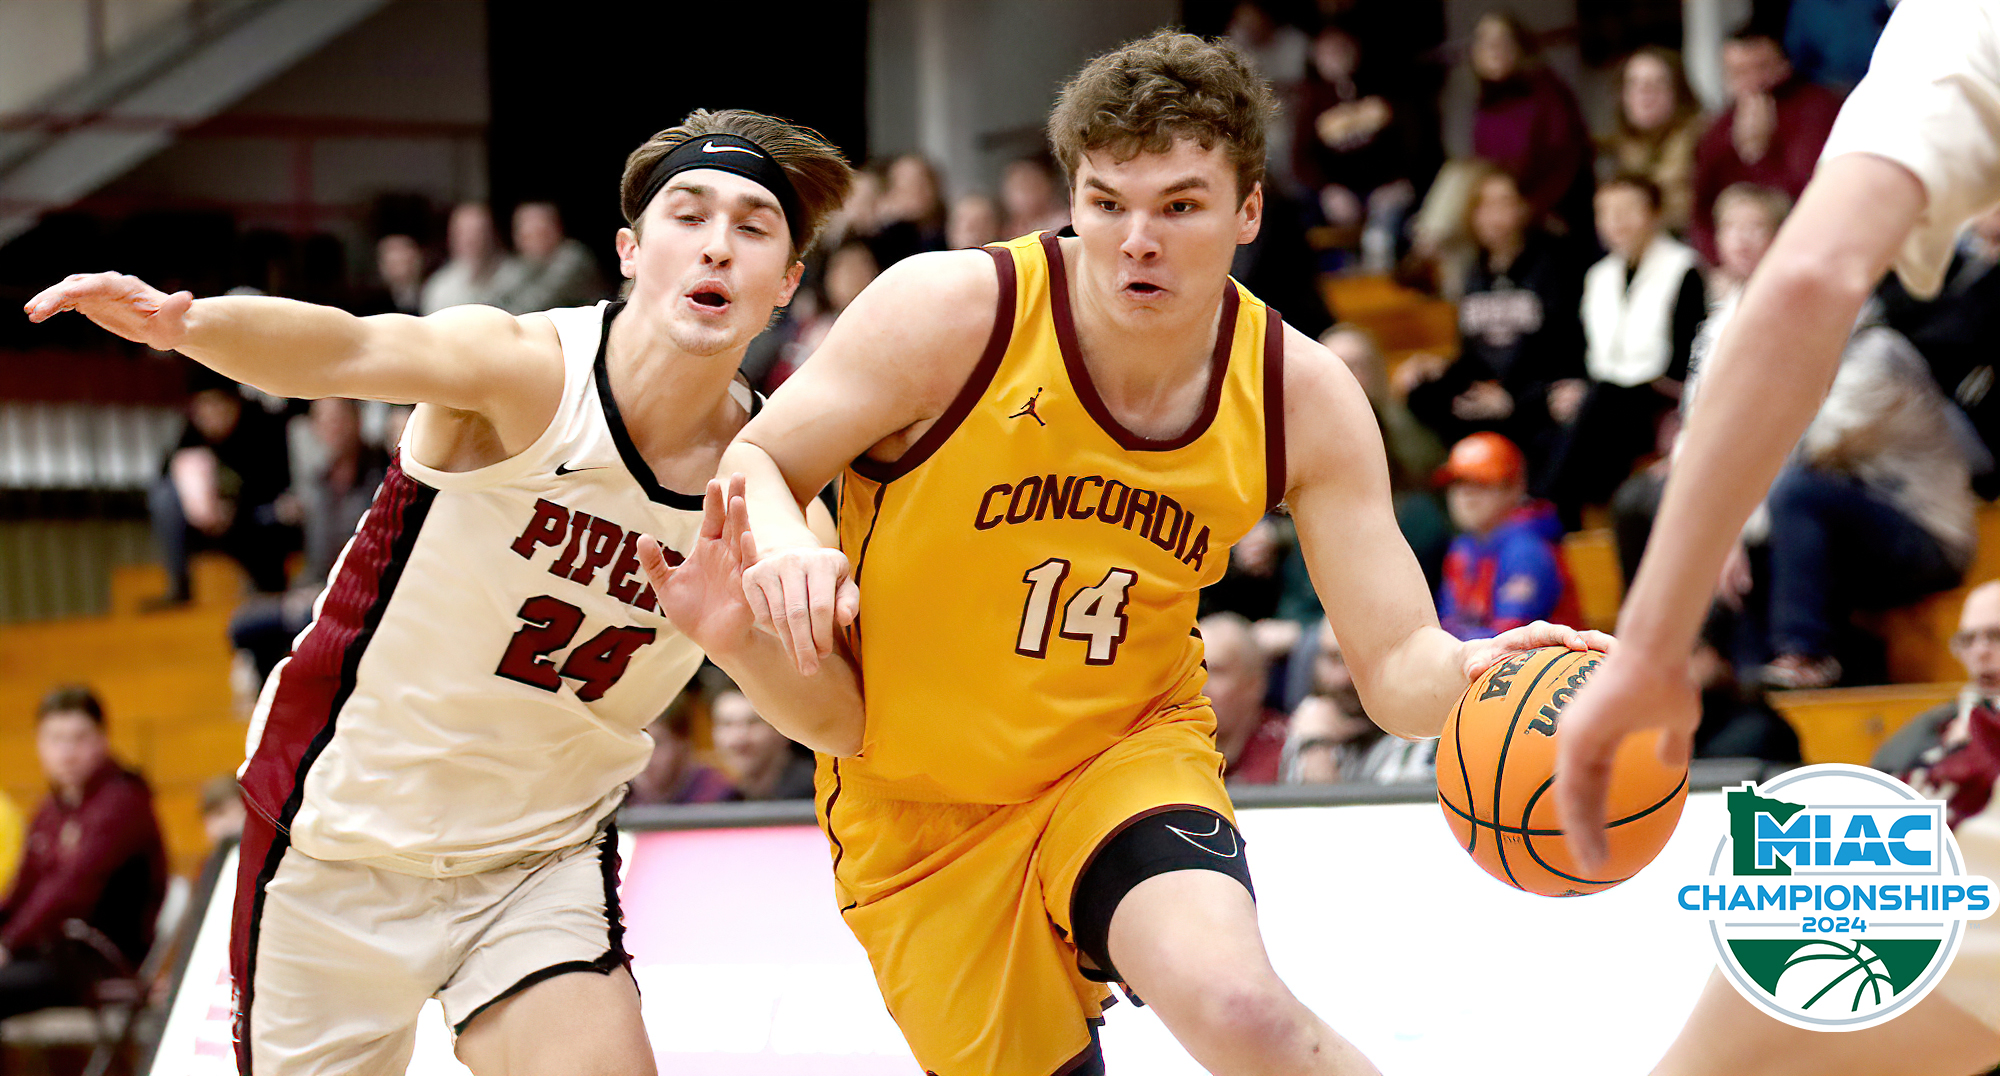 Rowan Nelson drives past a Hamline player in the first half of the Cobbers' quarterfinal game. (Photo courtesy of Ryan Coleman, d3photography).